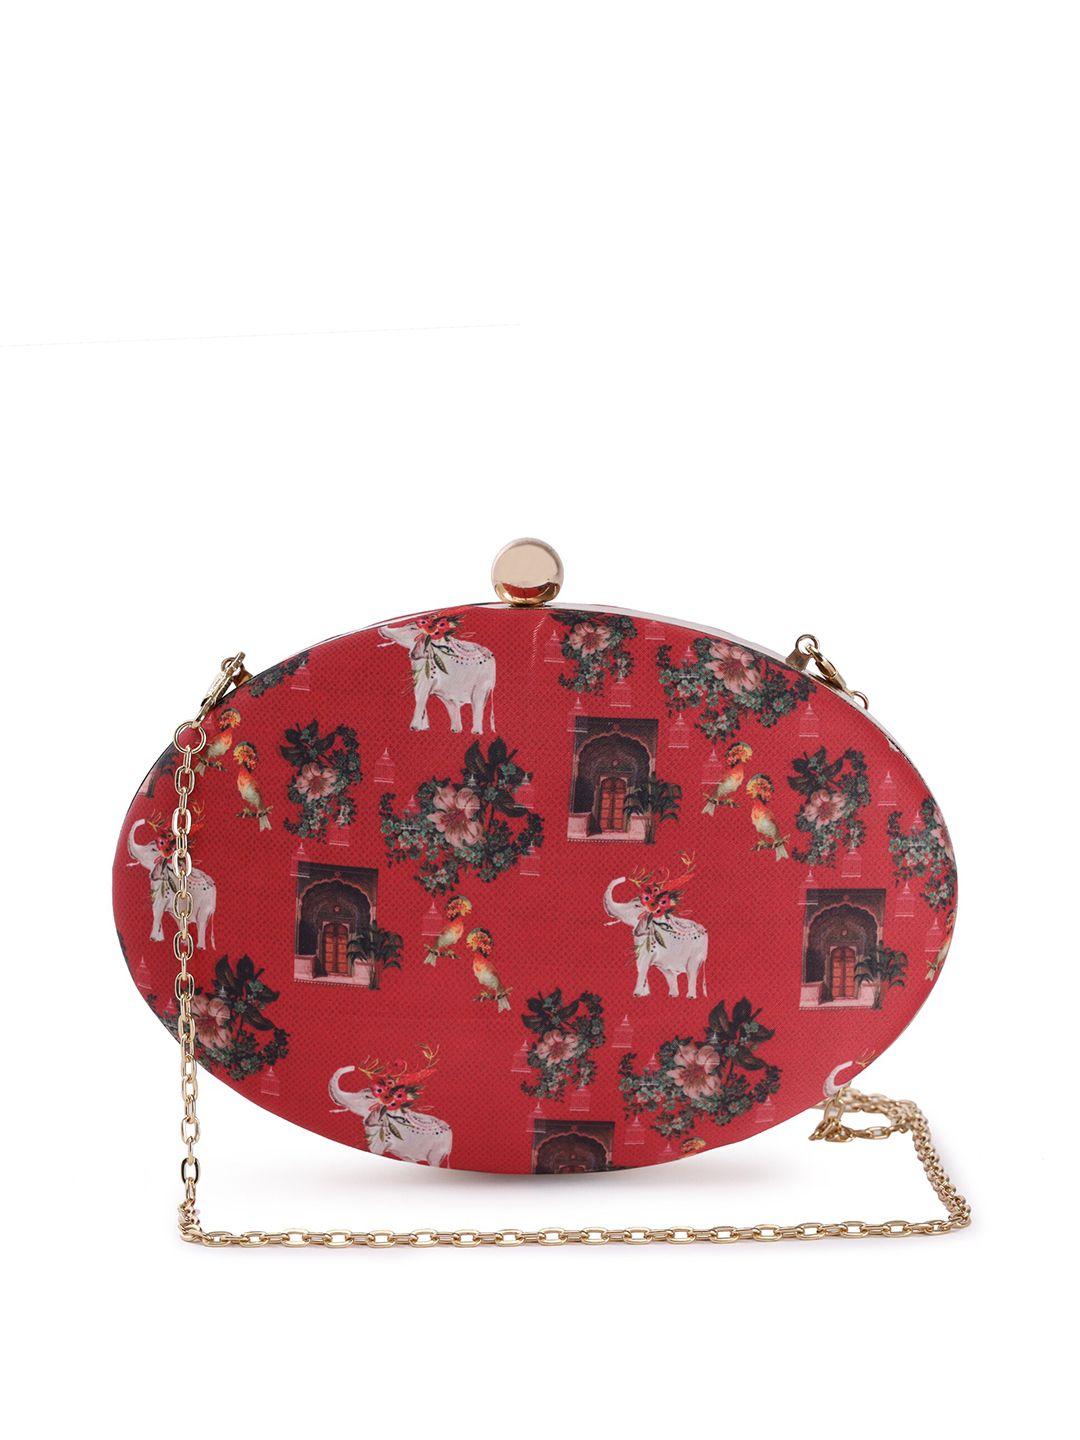 trink printed box clutch with chain strap